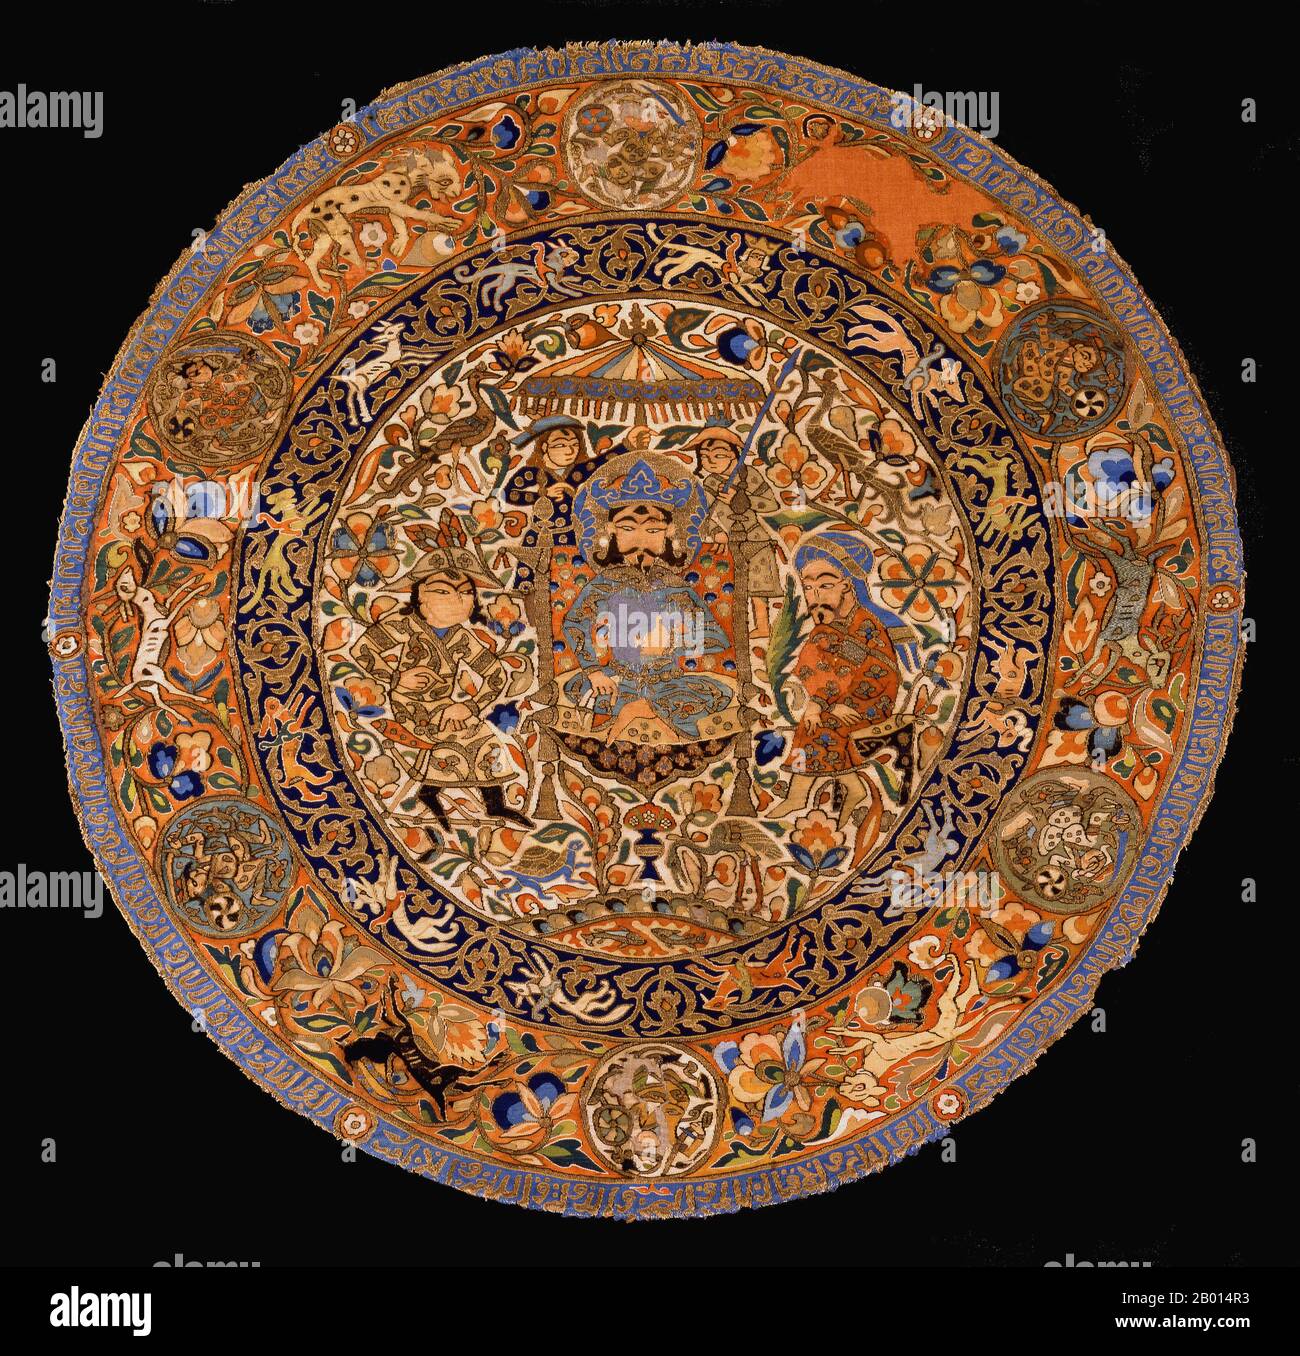 Iran/Iraq: Circular piece of silk, cotton and gold with Mongol images, Ilkhanid, early 14th century.  The Ilkhanate, also spelled Il-khanate or Il Khanate was a Mongol khanate established in Persia in the 13th century, considered a part of the Mongol Empire. The Ilkhanate was based, originally, on Genghis Khan's campaigns in the Khwarezmid Empire in 1219–1224, and founded by Genghis's grandson, Hulagu, in territories which today comprise most of Iran, Iraq, Afghanistan, Turkmenistan, Armenia, Azerbaijan, Georgia, Turkey, and some regions of western Pakistan. Stock Photo